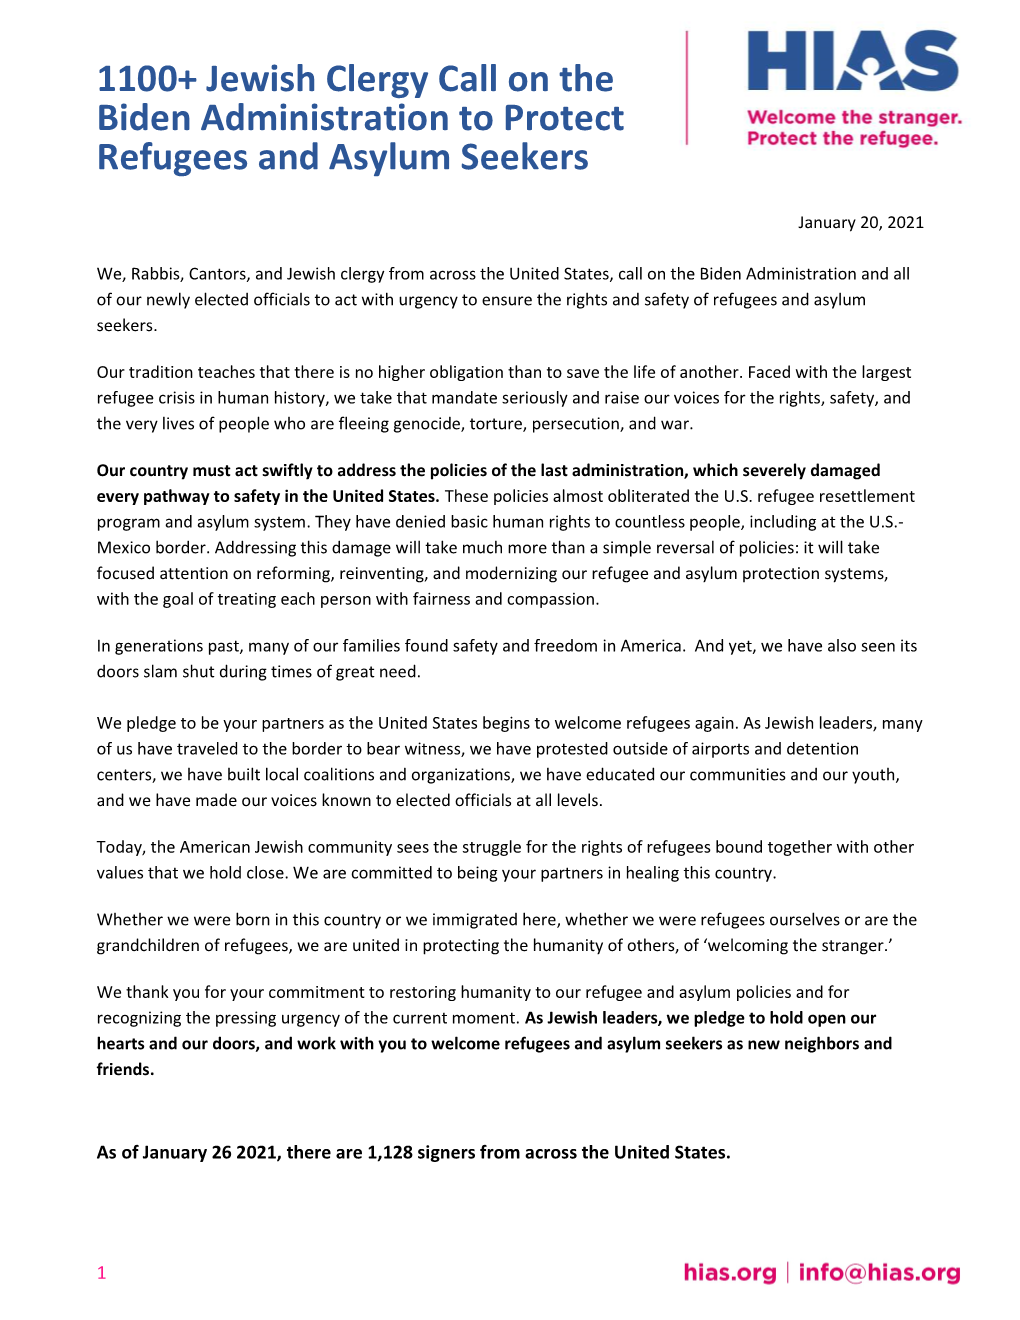 1100+ Jewish Clergy Call on the Biden Administration to Protect Refugees and Asylum Seekers